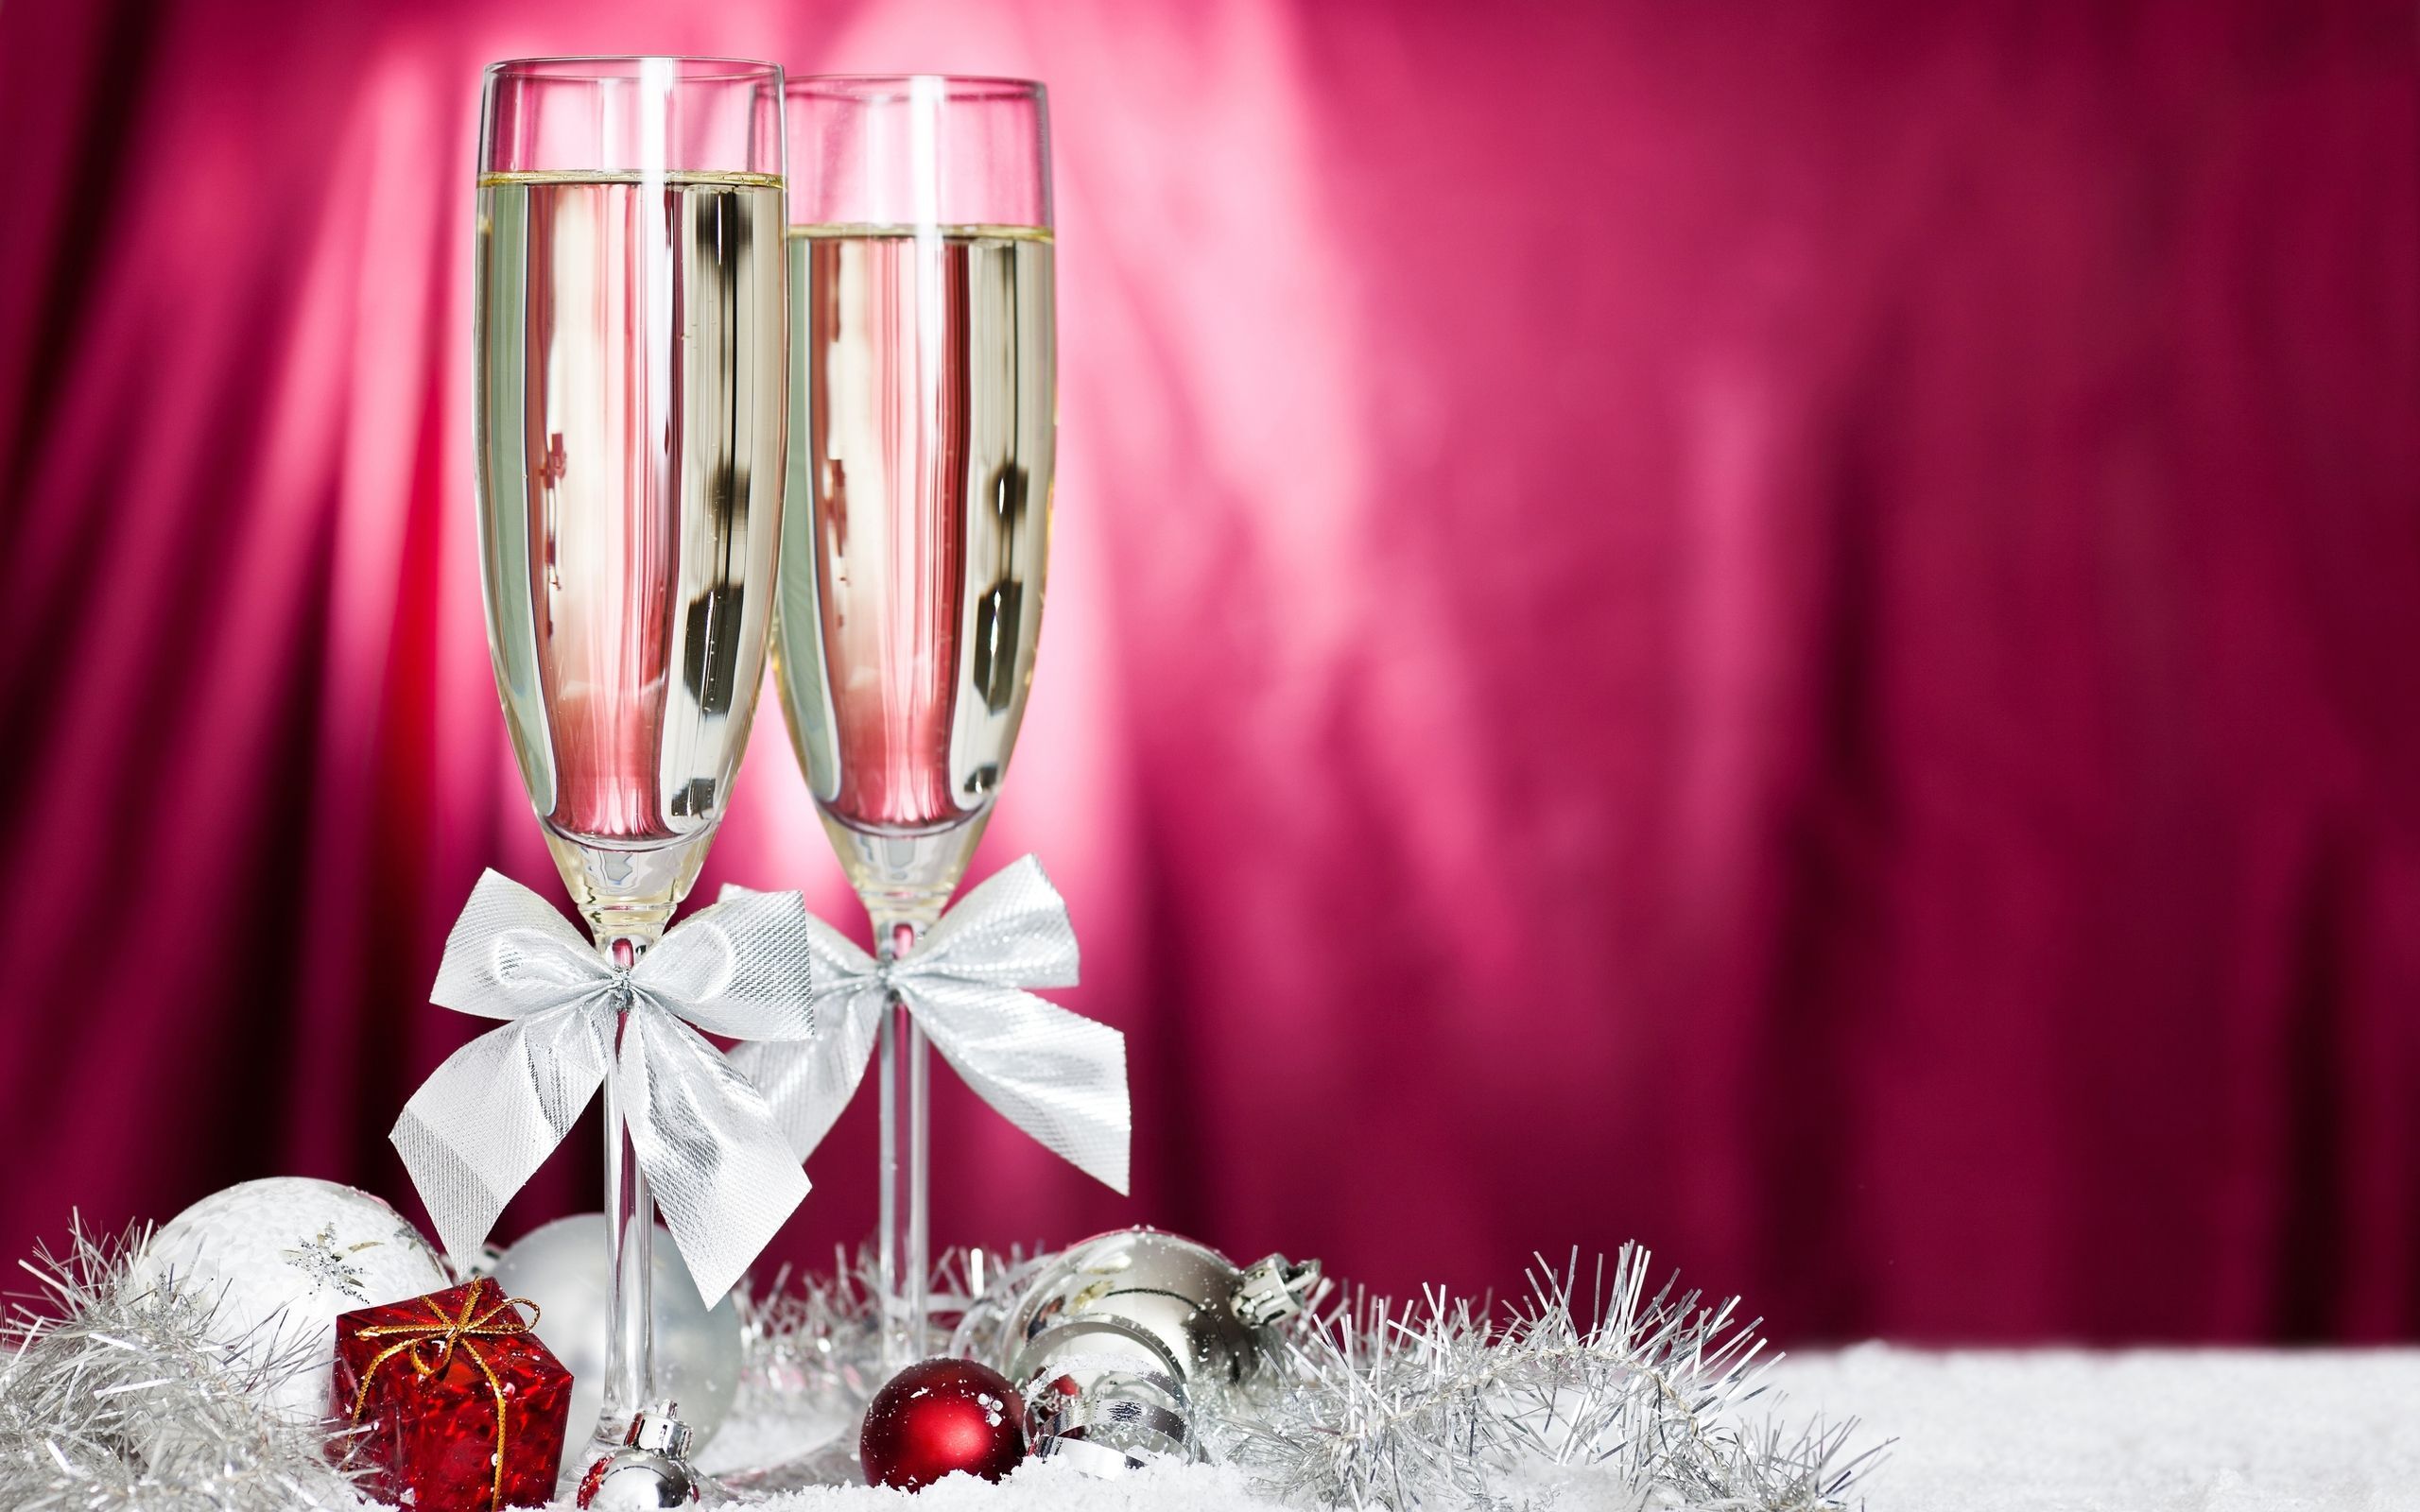 Top Champagne 2015 Wallpaper Images for Pinterest